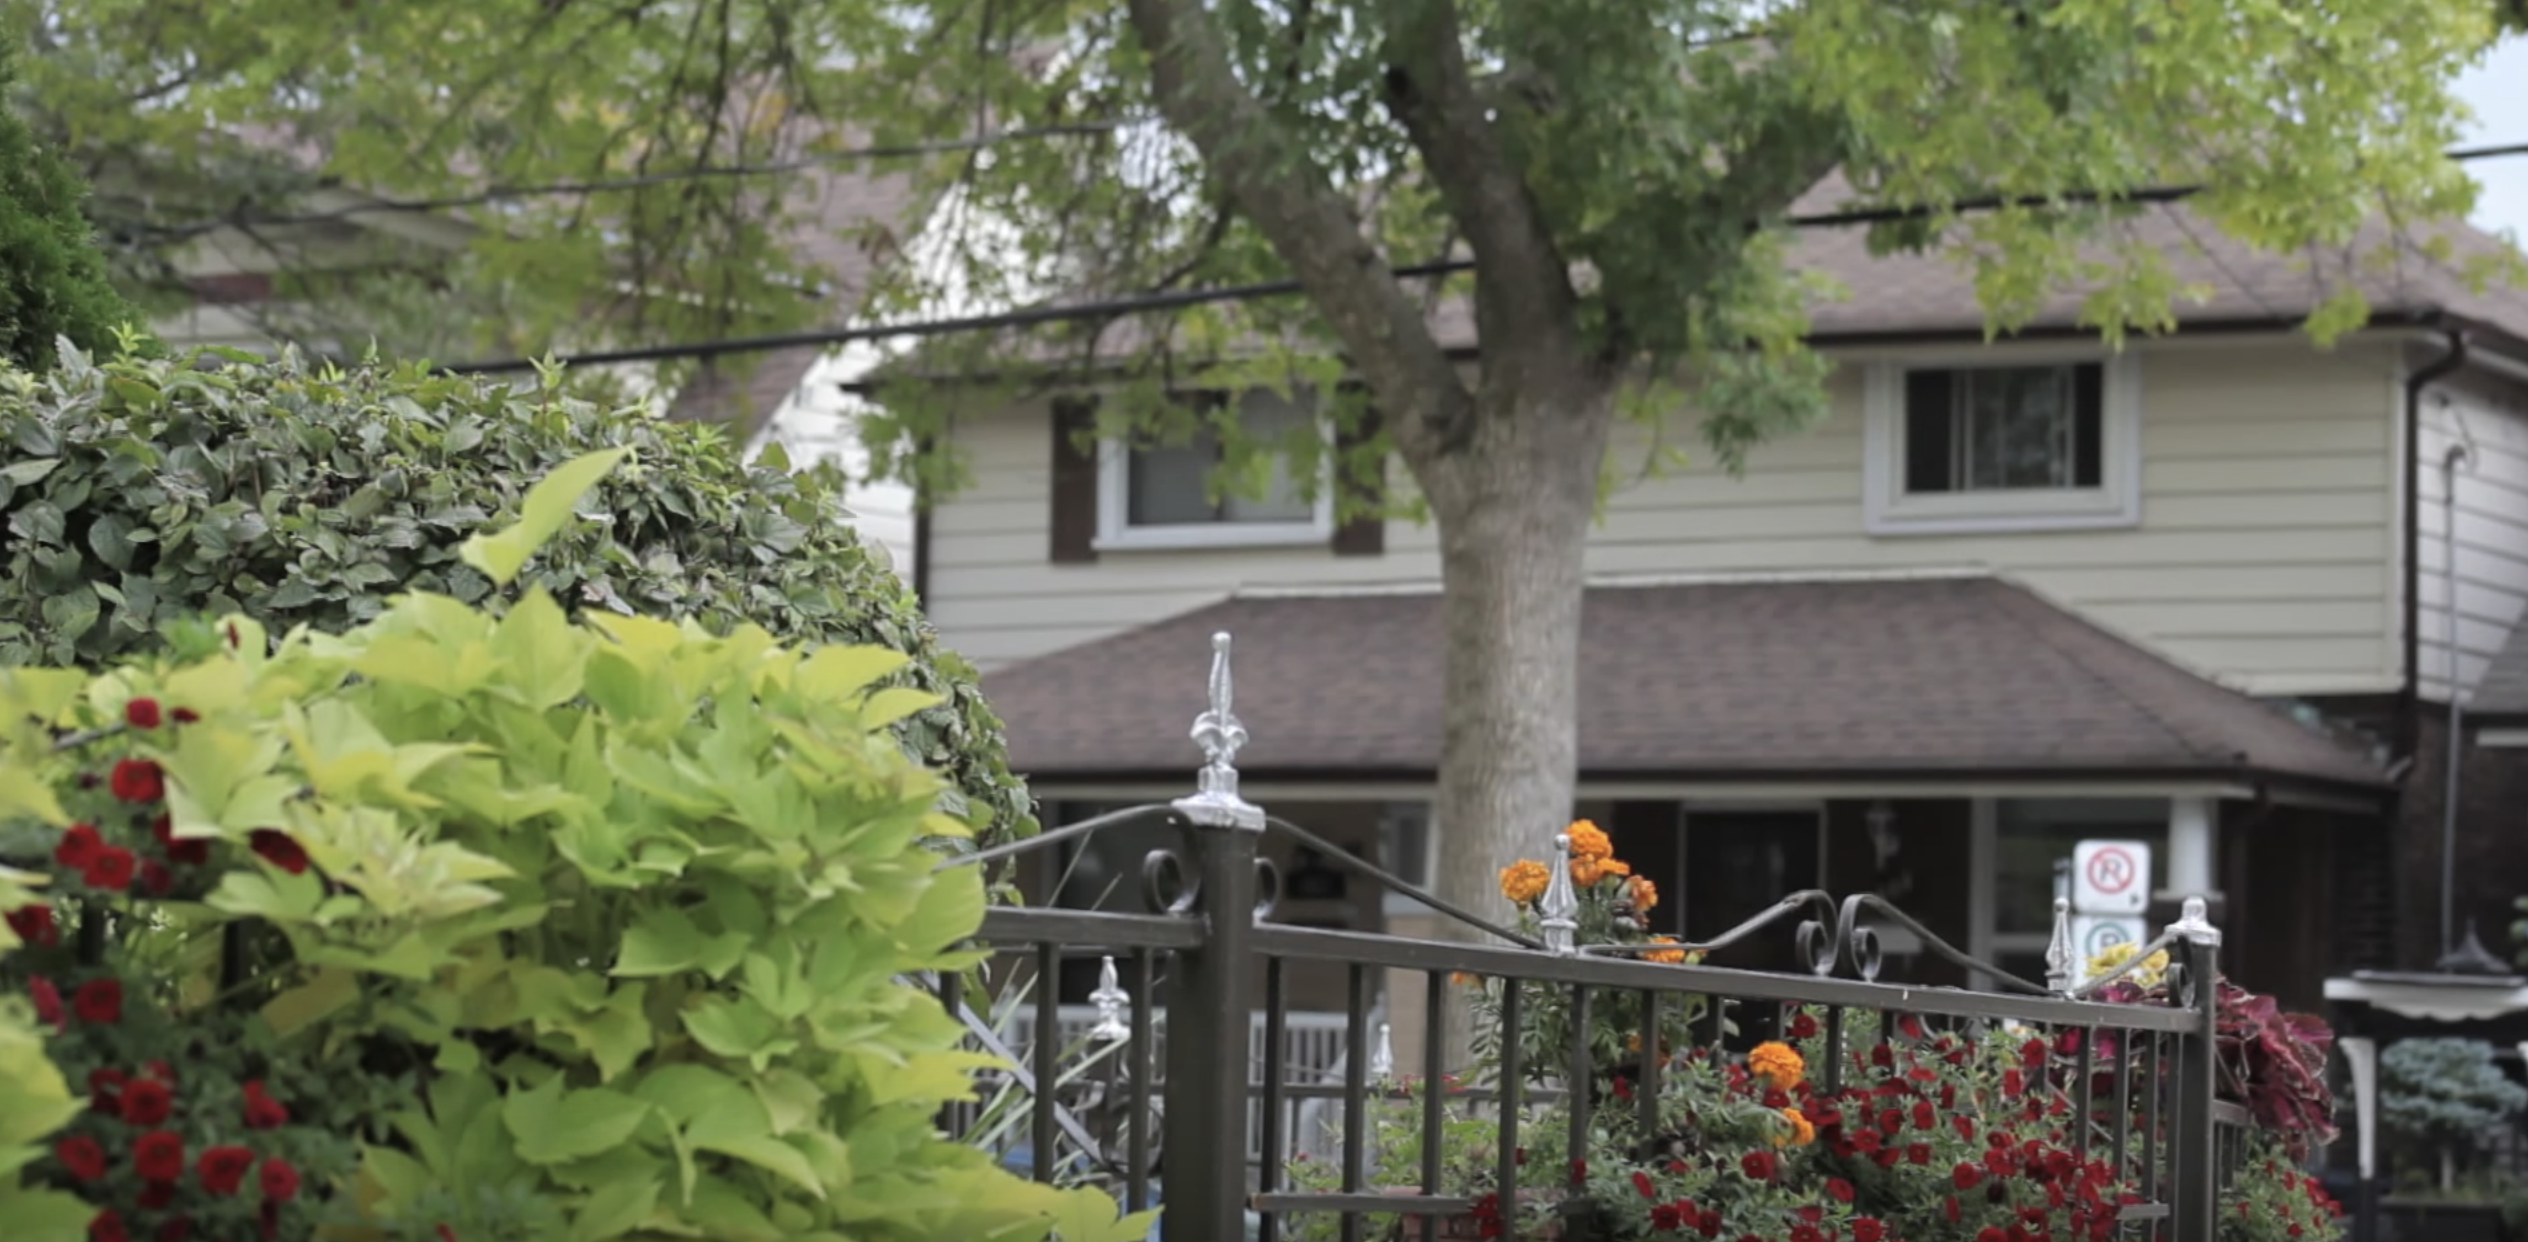 Video narrated by yours truly showcases Danforth East neighbourhood